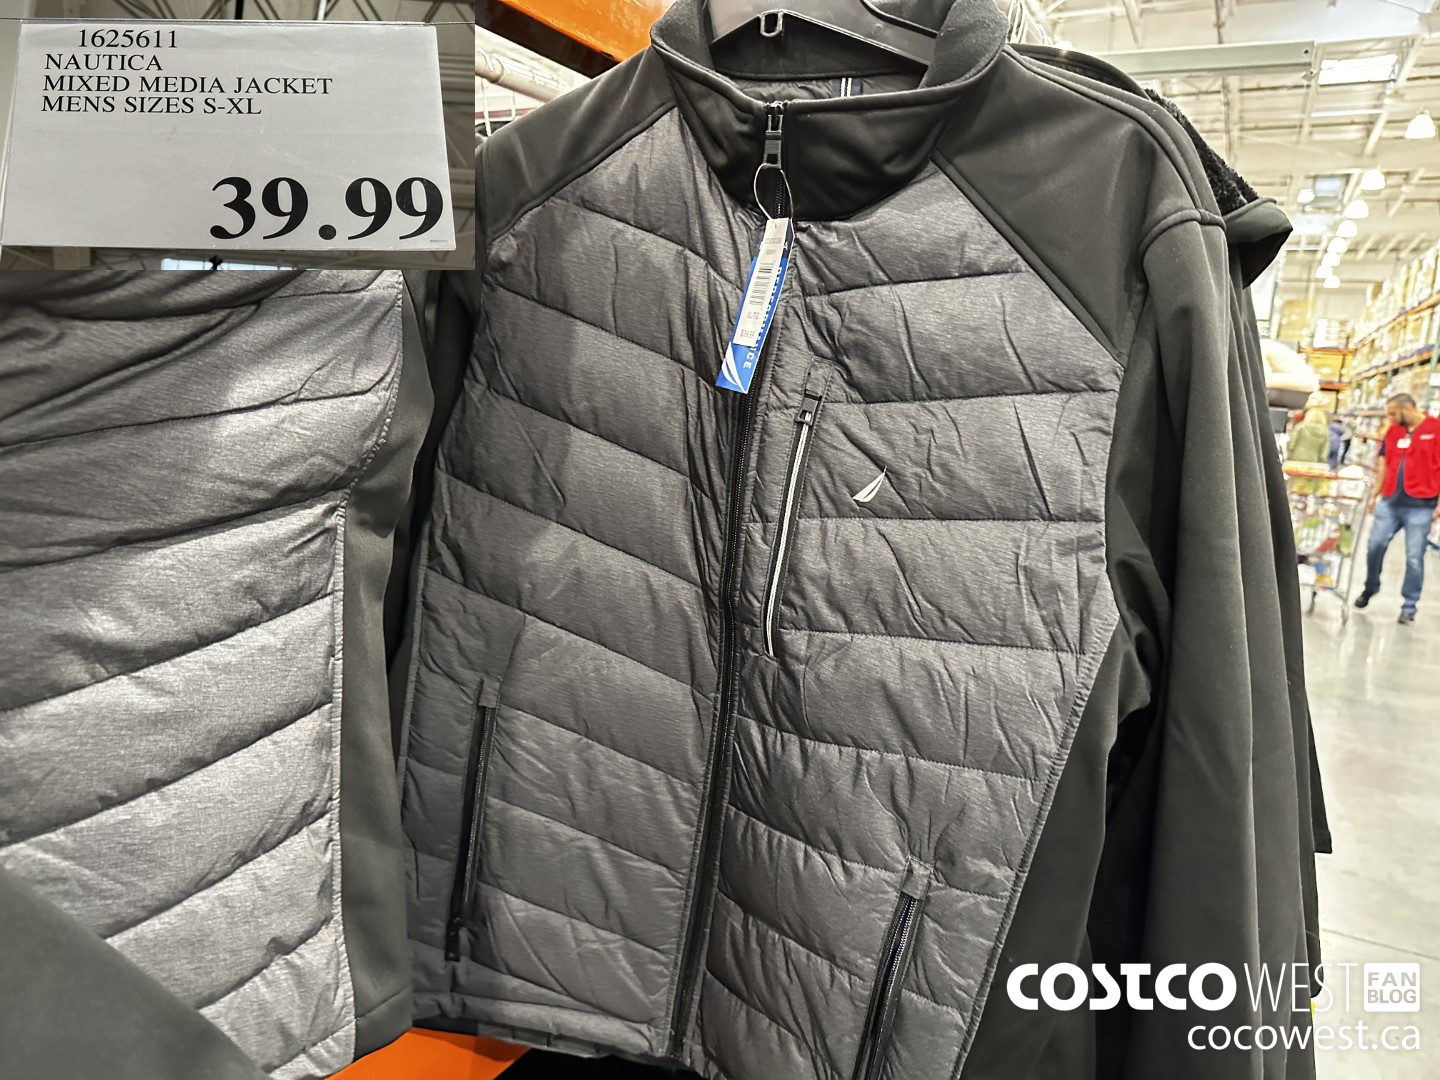 Costco Fall 2022 Superpost – Entire Clothing Section - Sweaters, and Boots! - Costco West Fan Blog